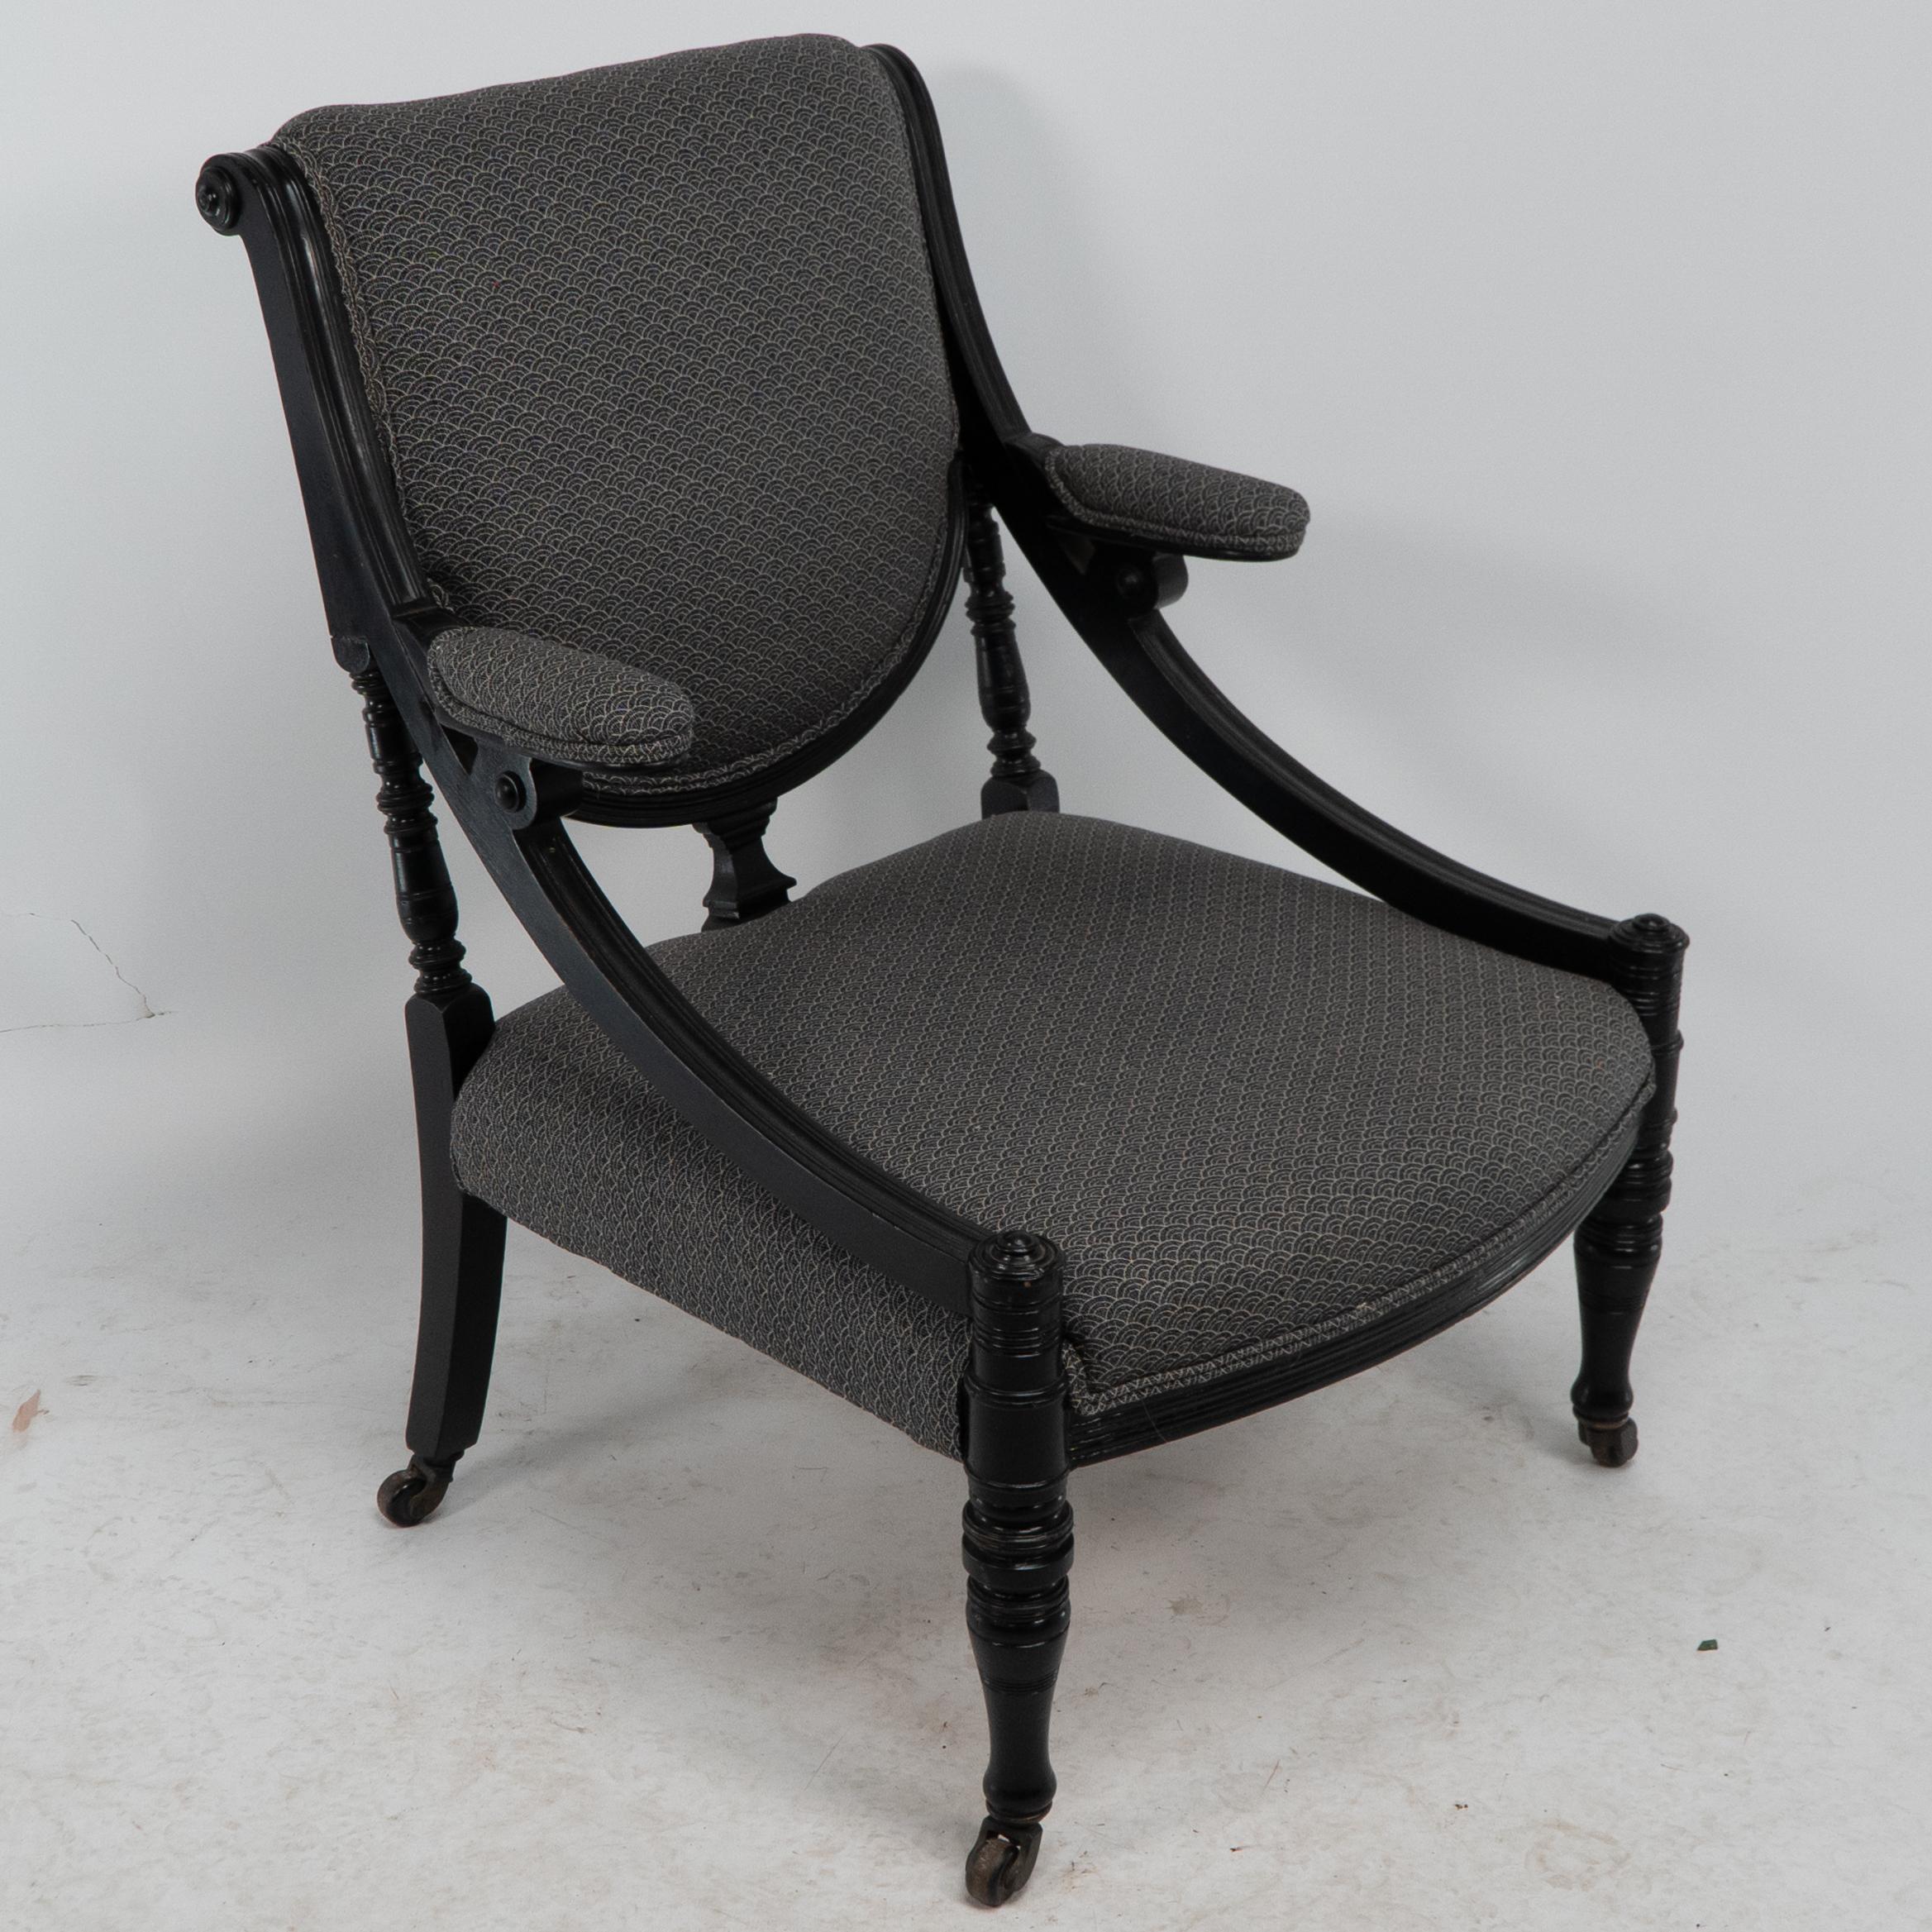 A stylish Aesthetic Movement ebonized armchair with sweeping side rail incorporating the upholstered armrests which are set back to accommodate those wonderful hoop dresses of the Victorian period, so a lady can rest her arms with her dress